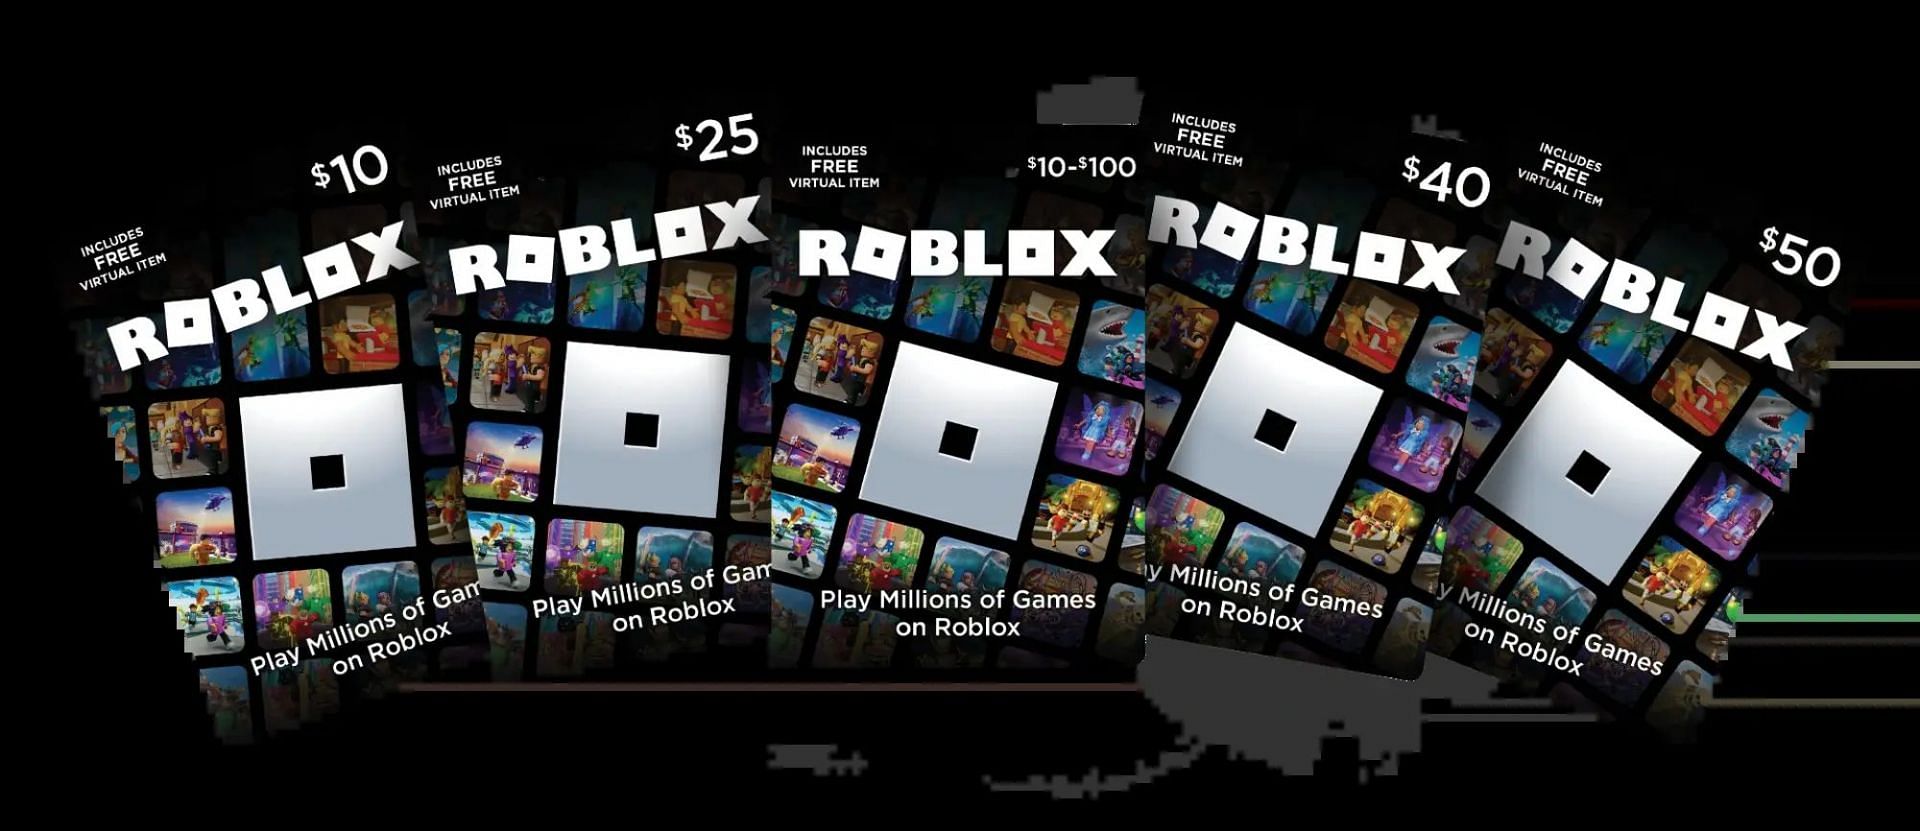 Roblox Gift Cards (image via Roblox)